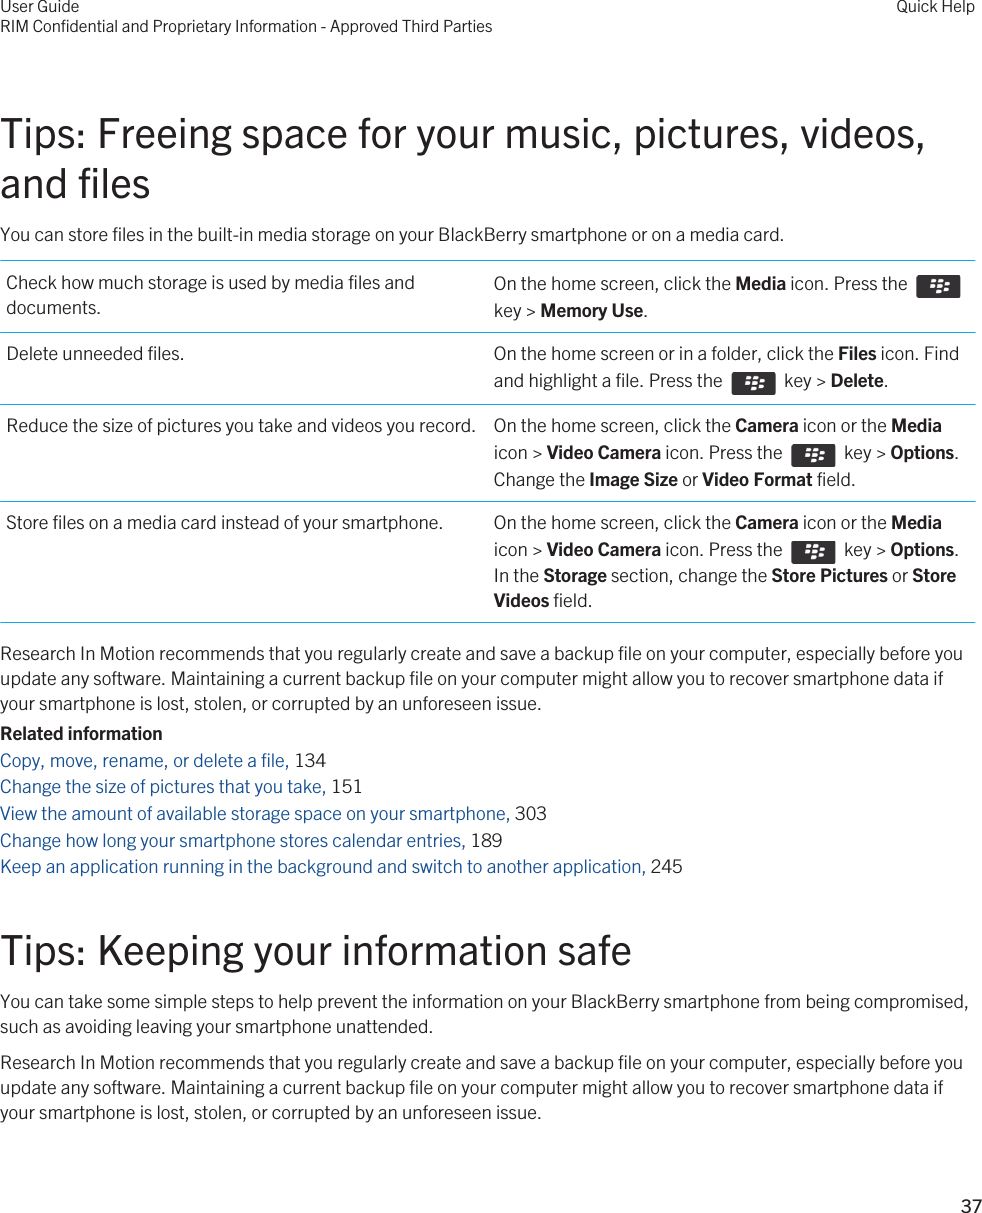 Tips: Freeing space for your music, pictures, videos, and filesYou can store files in the built-in media storage on your BlackBerry smartphone or on a media card.Check how much storage is used by media files and documents.On the home screen, click the Media icon. Press the key &gt; Memory Use.Delete unneeded files. On the home screen or in a folder, click the Files icon. Find and highlight a file. Press the    key &gt; Delete.Reduce the size of pictures you take and videos you record. On the home screen, click the Camera icon or the Media icon &gt; Video Camera icon. Press the    key &gt; Options. Change the Image Size or Video Format field.Store files on a media card instead of your smartphone. On the home screen, click the Camera icon or the Media icon &gt; Video Camera icon. Press the    key &gt; Options. In the Storage section, change the Store Pictures or Store Videos field.Research In Motion recommends that you regularly create and save a backup file on your computer, especially before you update any software. Maintaining a current backup file on your computer might allow you to recover smartphone data if your smartphone is lost, stolen, or corrupted by an unforeseen issue.Related informationCopy, move, rename, or delete a file, 134Change the size of pictures that you take, 151View the amount of available storage space on your smartphone, 303Change how long your smartphone stores calendar entries, 189Keep an application running in the background and switch to another application, 245Tips: Keeping your information safeYou can take some simple steps to help prevent the information on your BlackBerry smartphone from being compromised, such as avoiding leaving your smartphone unattended.Research In Motion recommends that you regularly create and save a backup file on your computer, especially before you update any software. Maintaining a current backup file on your computer might allow you to recover smartphone data if your smartphone is lost, stolen, or corrupted by an unforeseen issue.User GuideRIM Confidential and Proprietary Information - Approved Third PartiesQuick Help37 